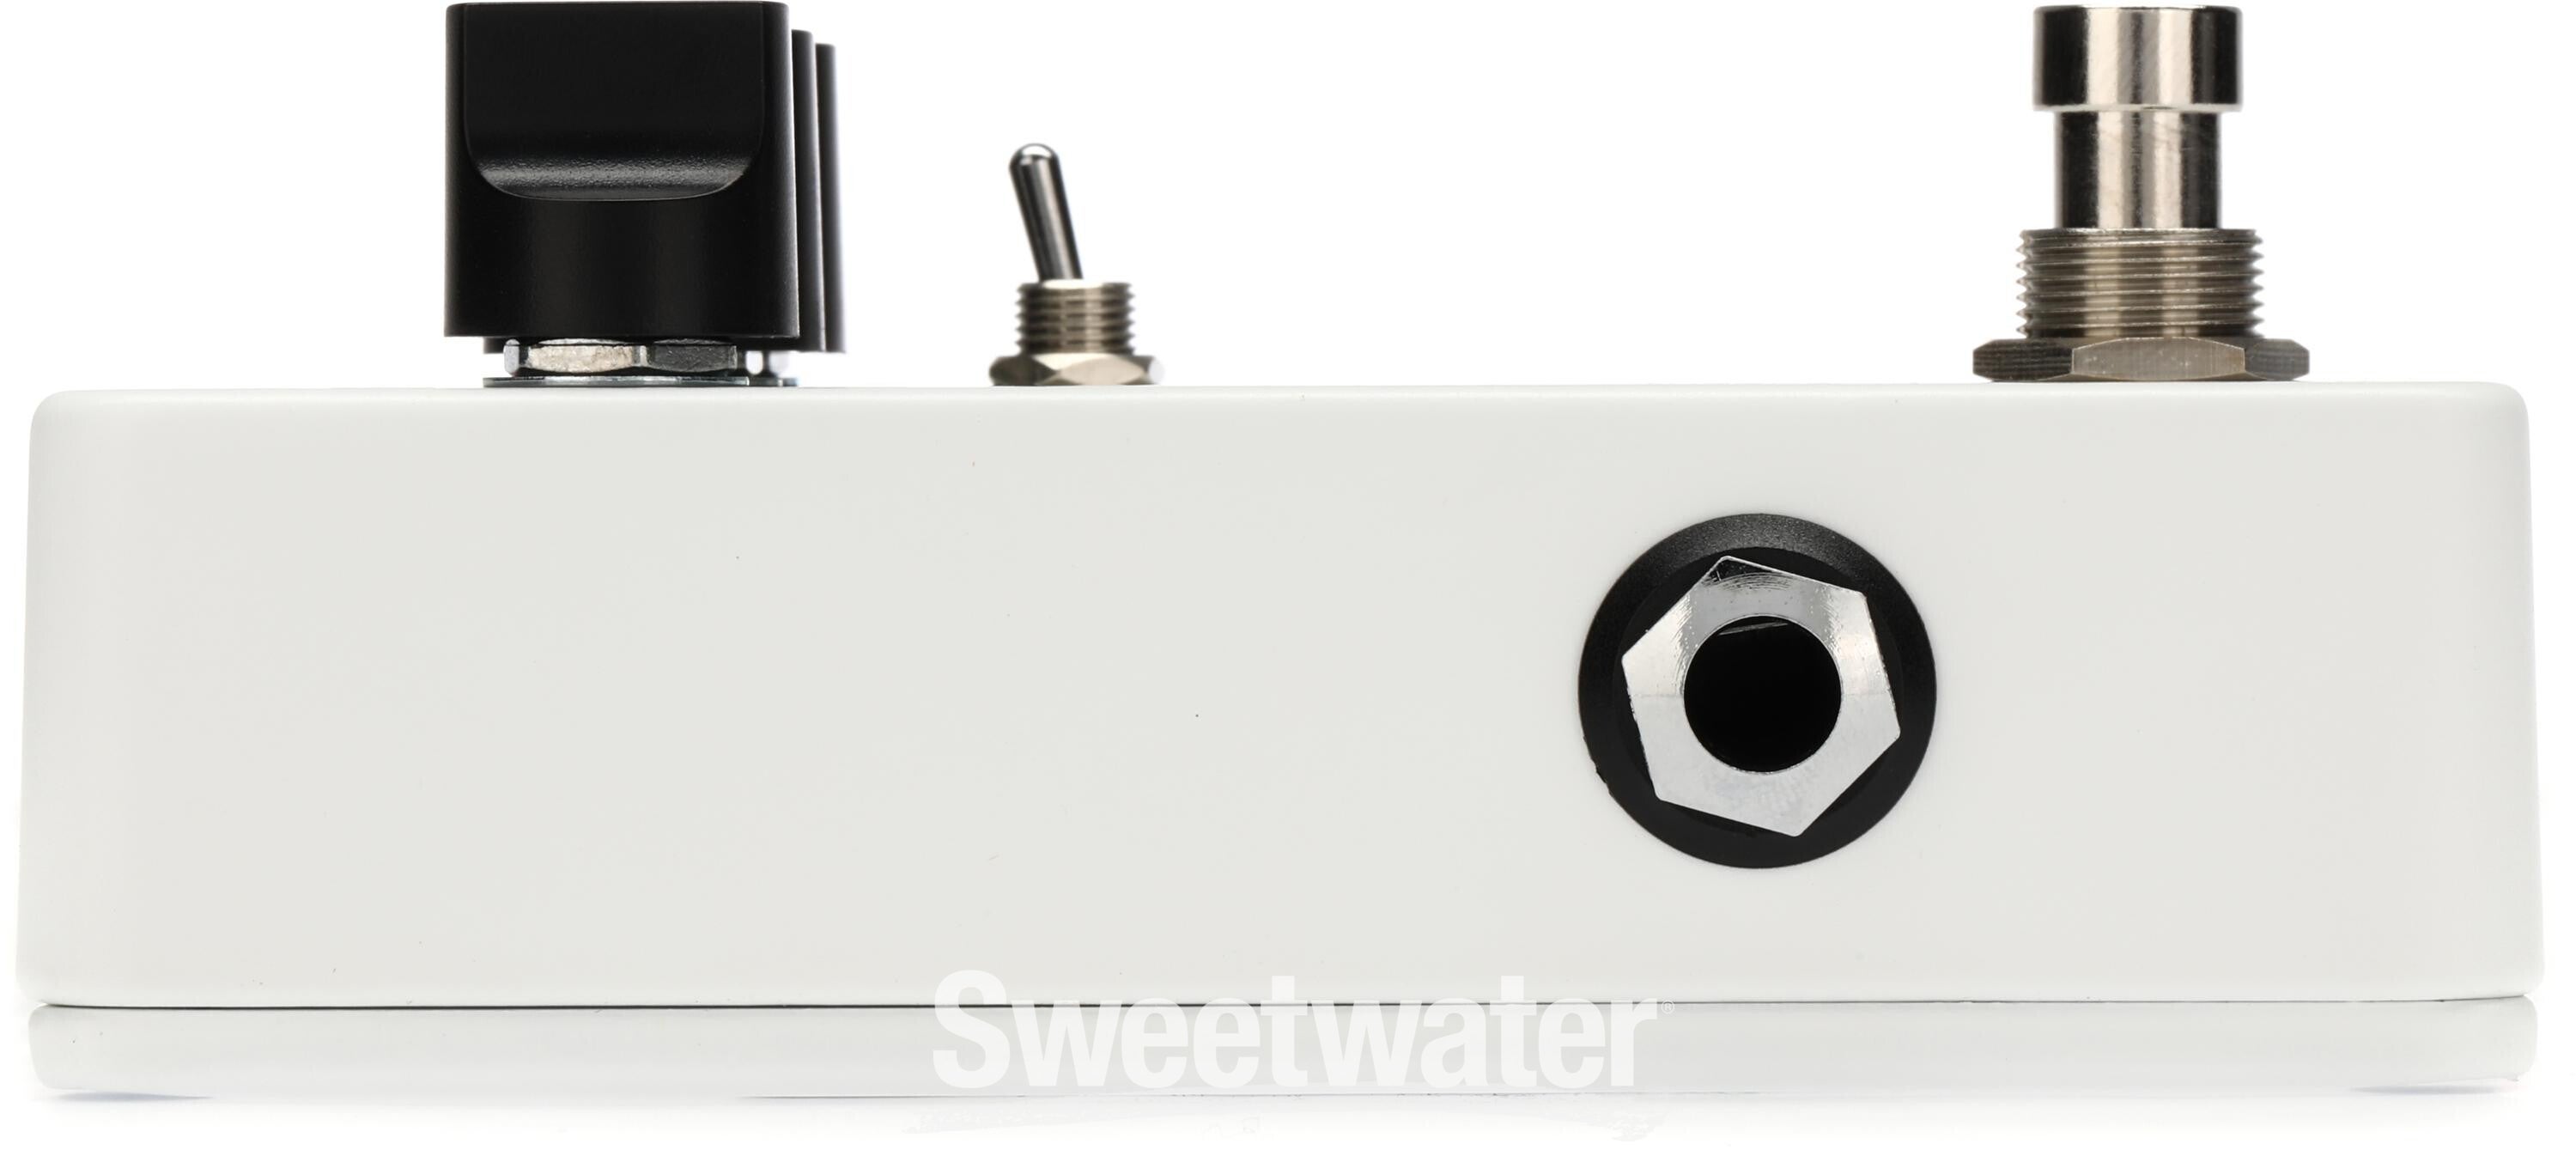 JHS 3 Series Screamer Pedal | Sweetwater